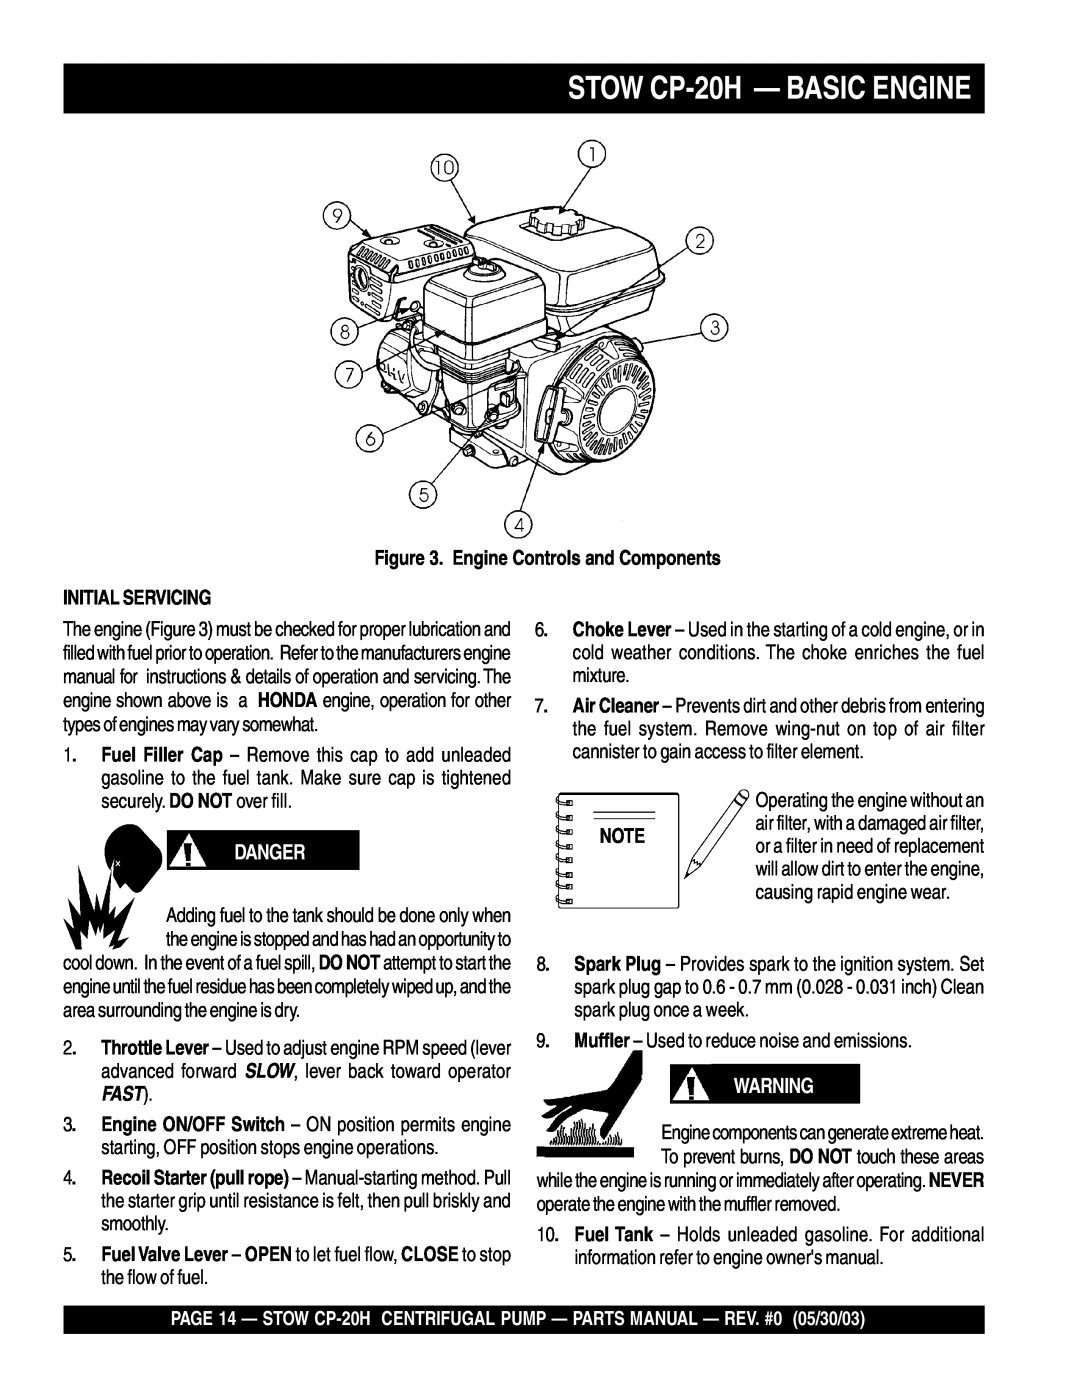 Stow manual STOW CP-20H- BASIC ENGINE, Danger, Engine Controls and Components, Initial Servicing 